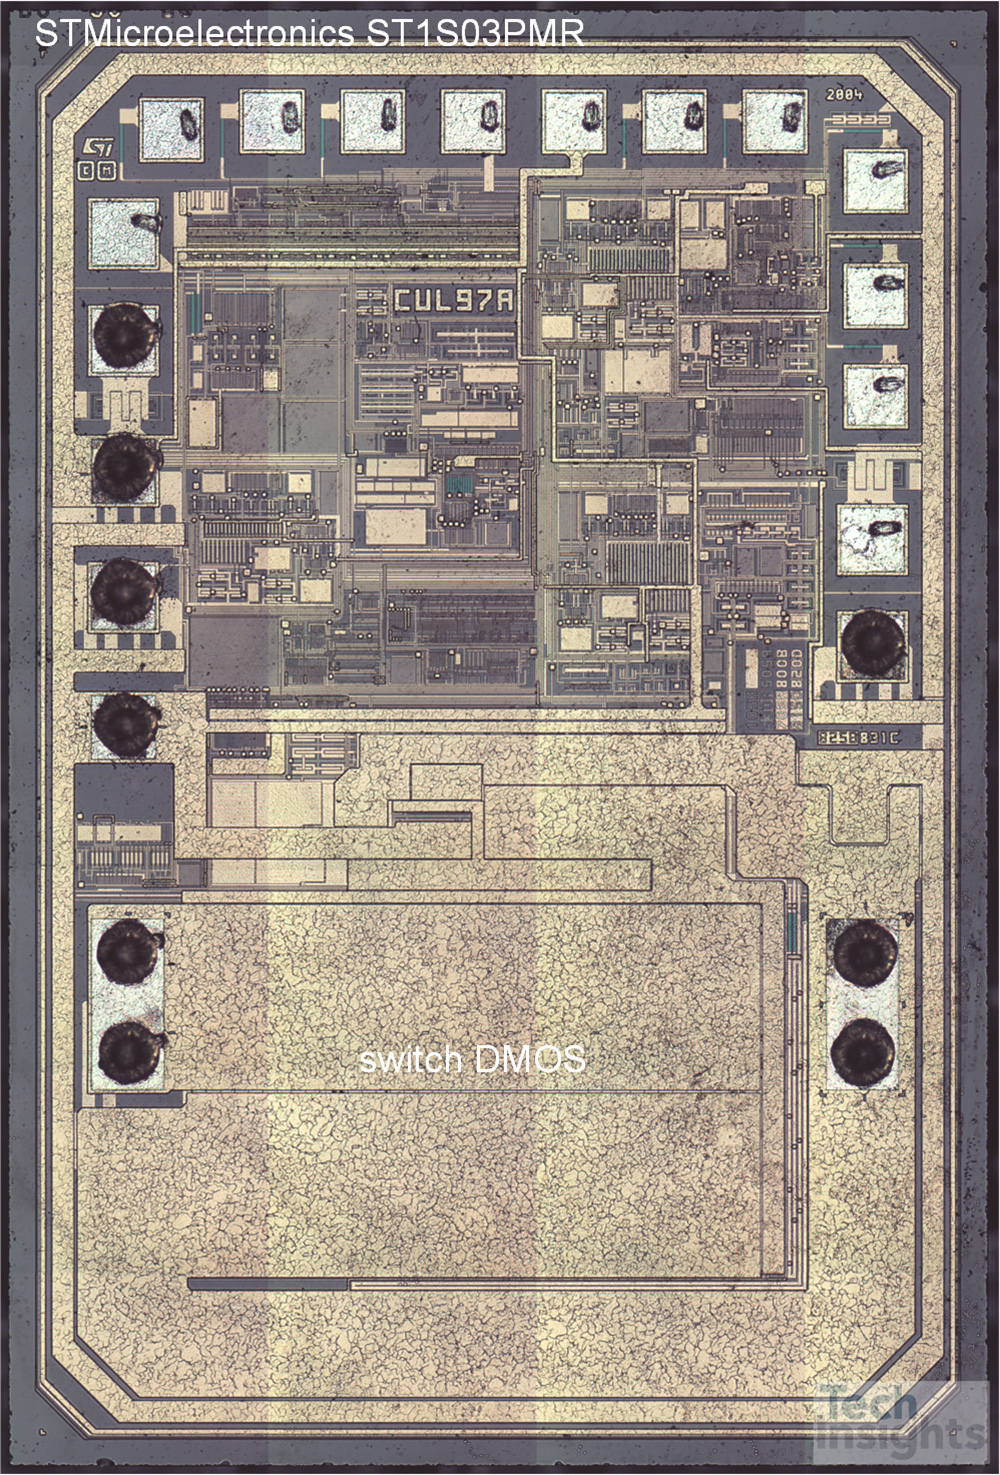 STMicroelectronics ST1S03 BCD6 Process Die Photograph